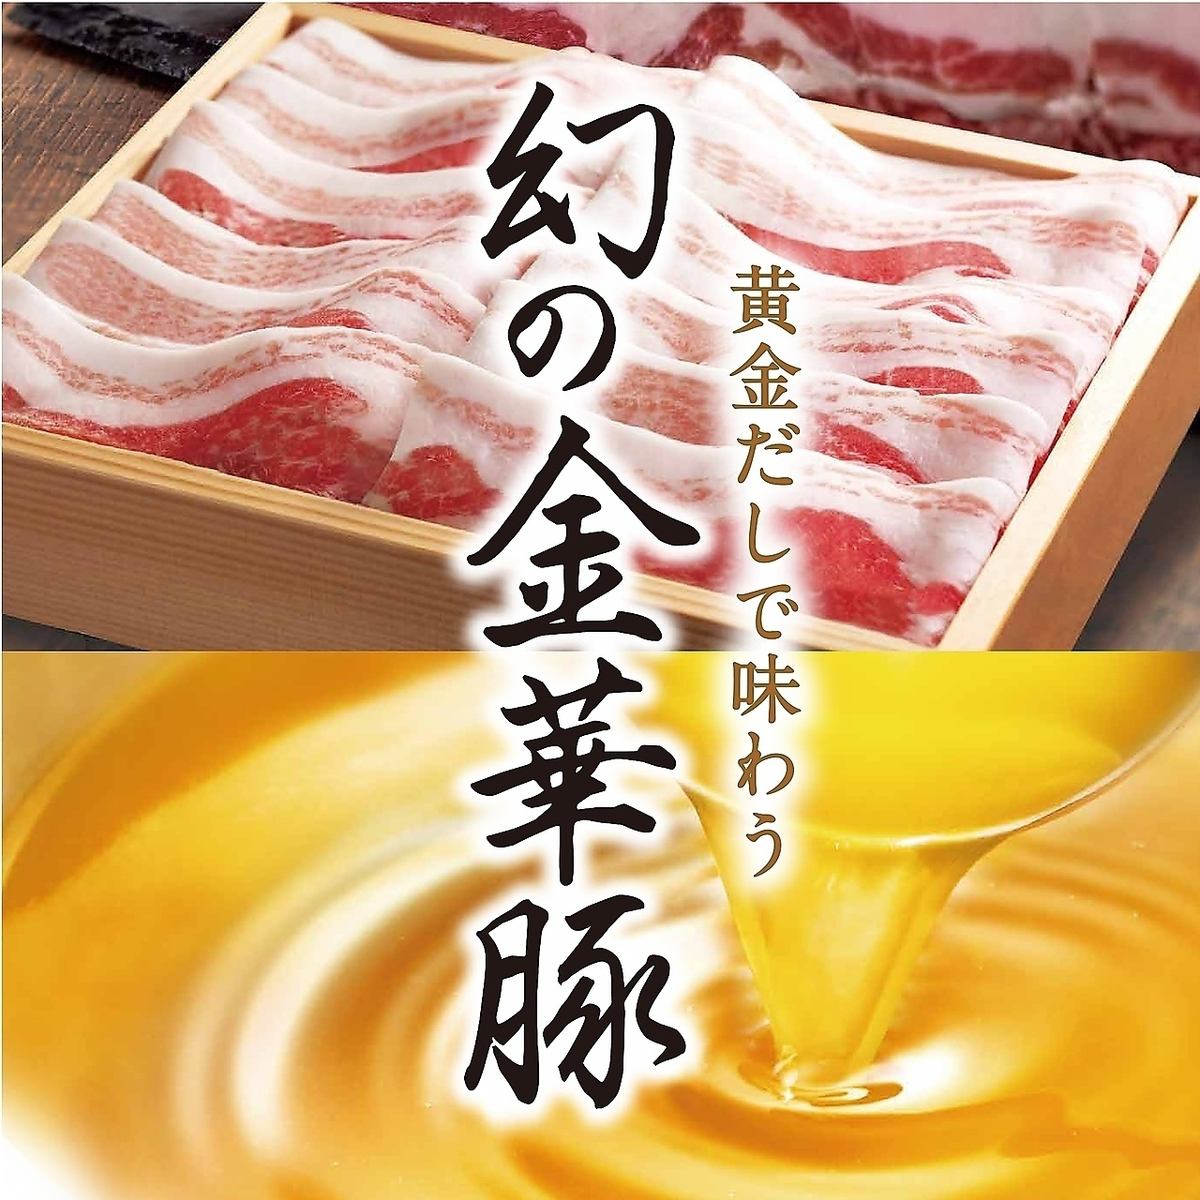 ★Limited time offer until mid-May★ "Phantom Jinhua Pork" course served with golden broth